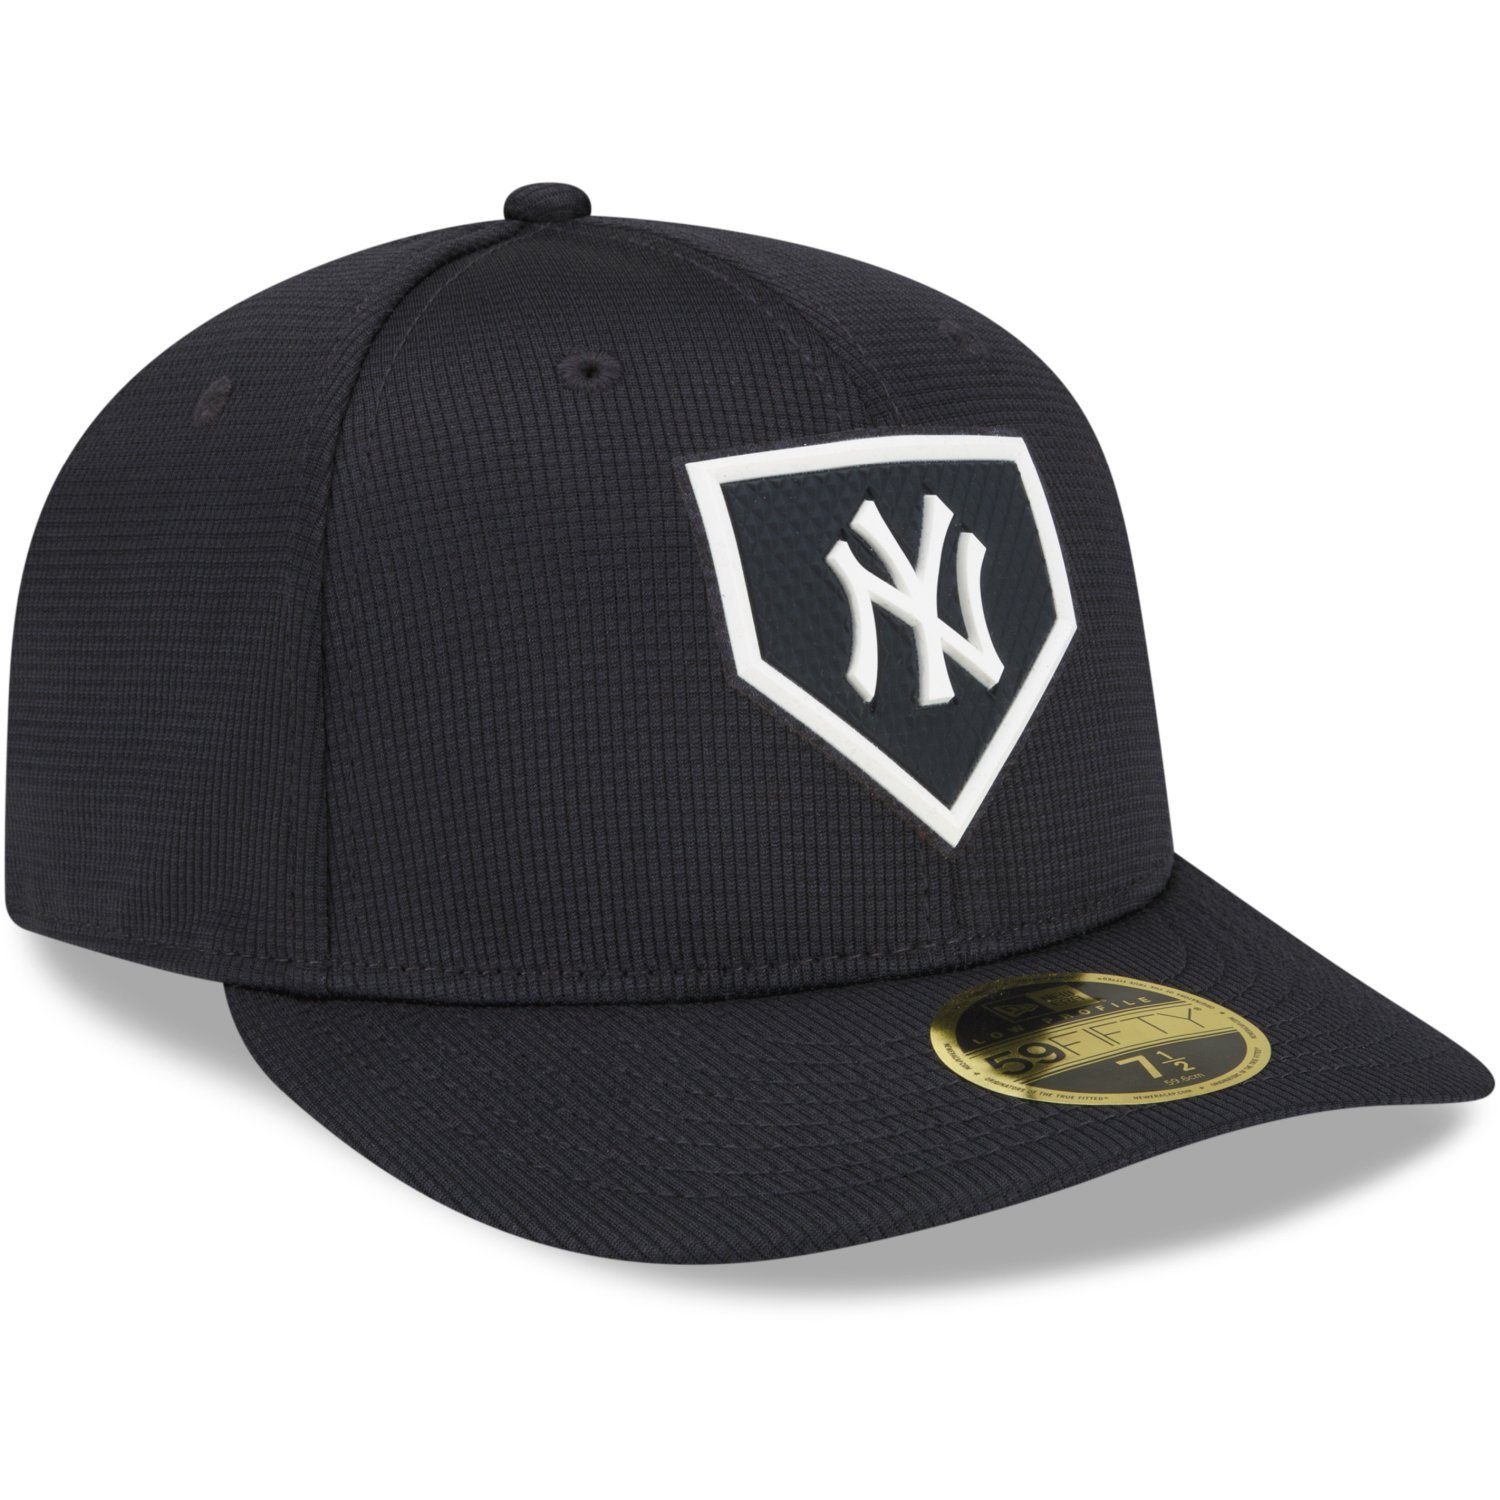 New Era Fitted Cap 59Fifty Low Profile CLUBHOUSE York New Yankees